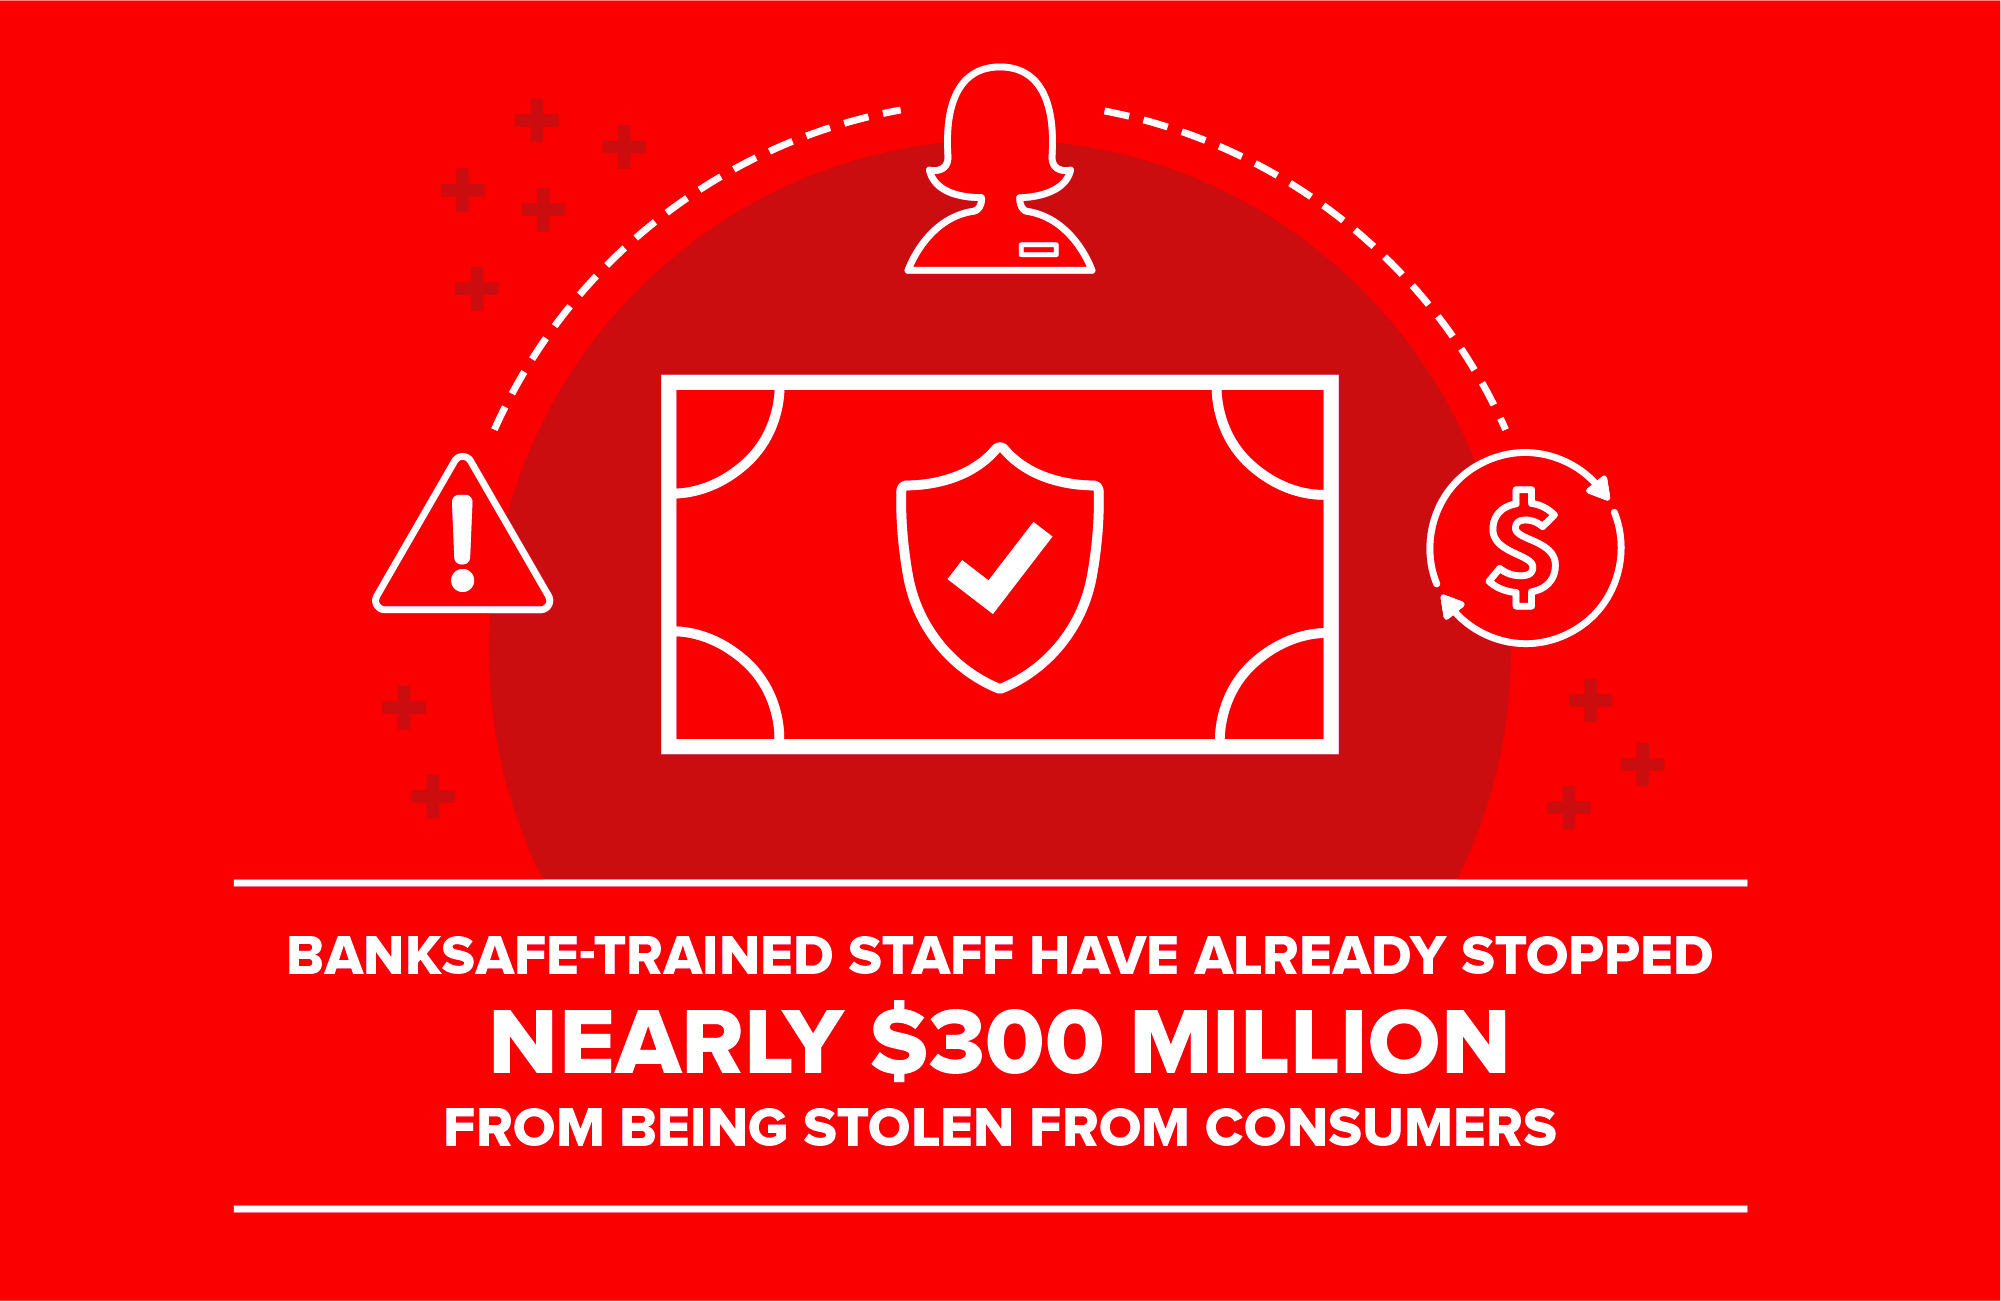 aarp banksafe-trained staff have stopped nearly $300 million from being stolen